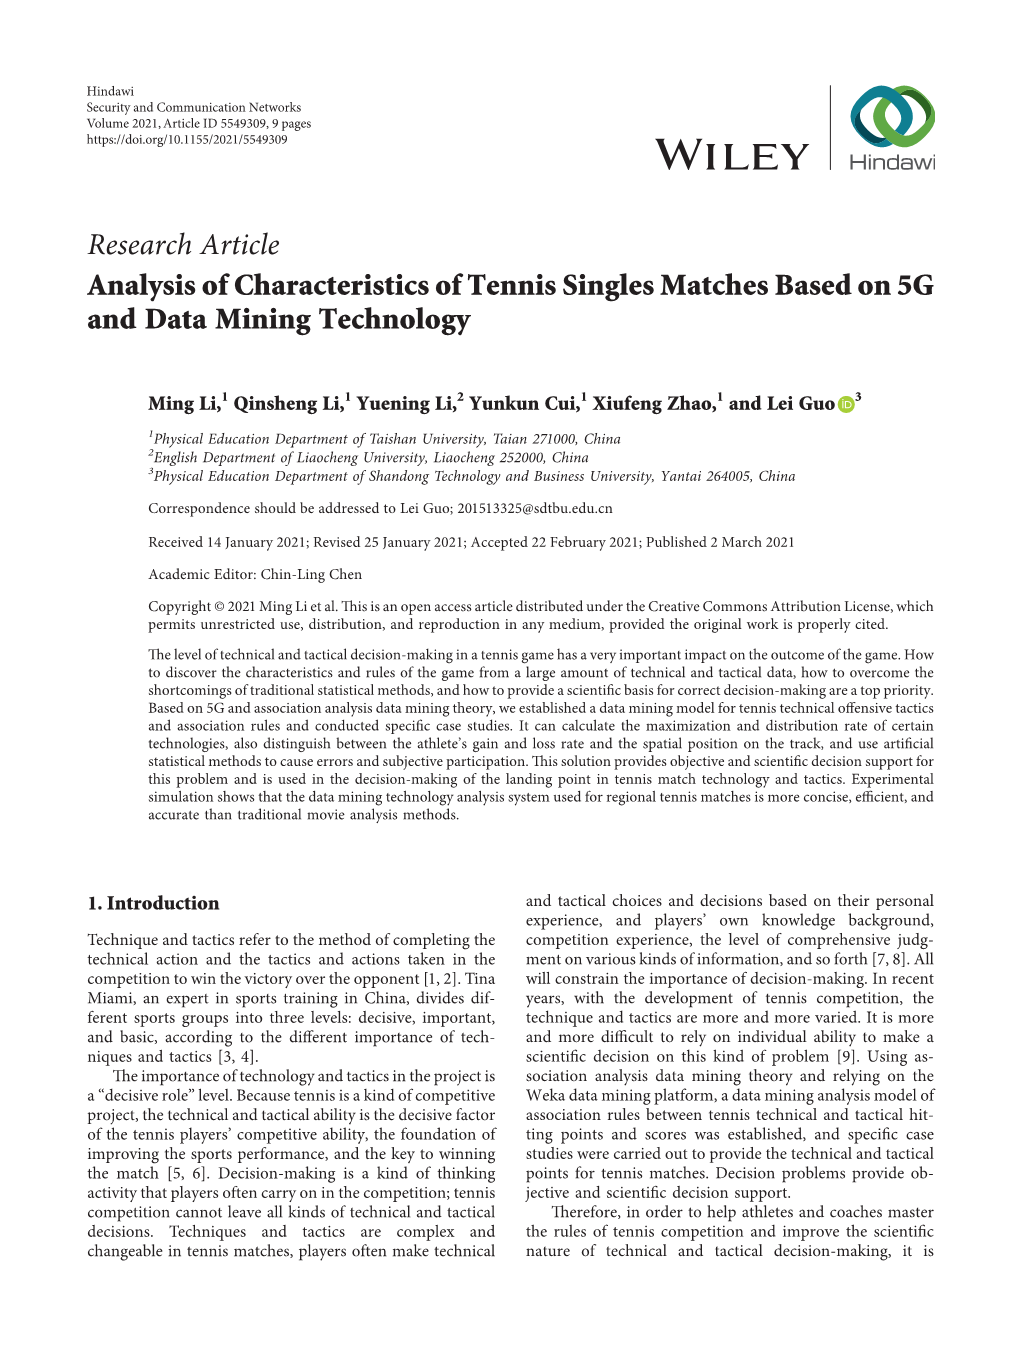 Analysis of Characteristics of Tennis Singles Matches Based on 5G and Data Mining Technology